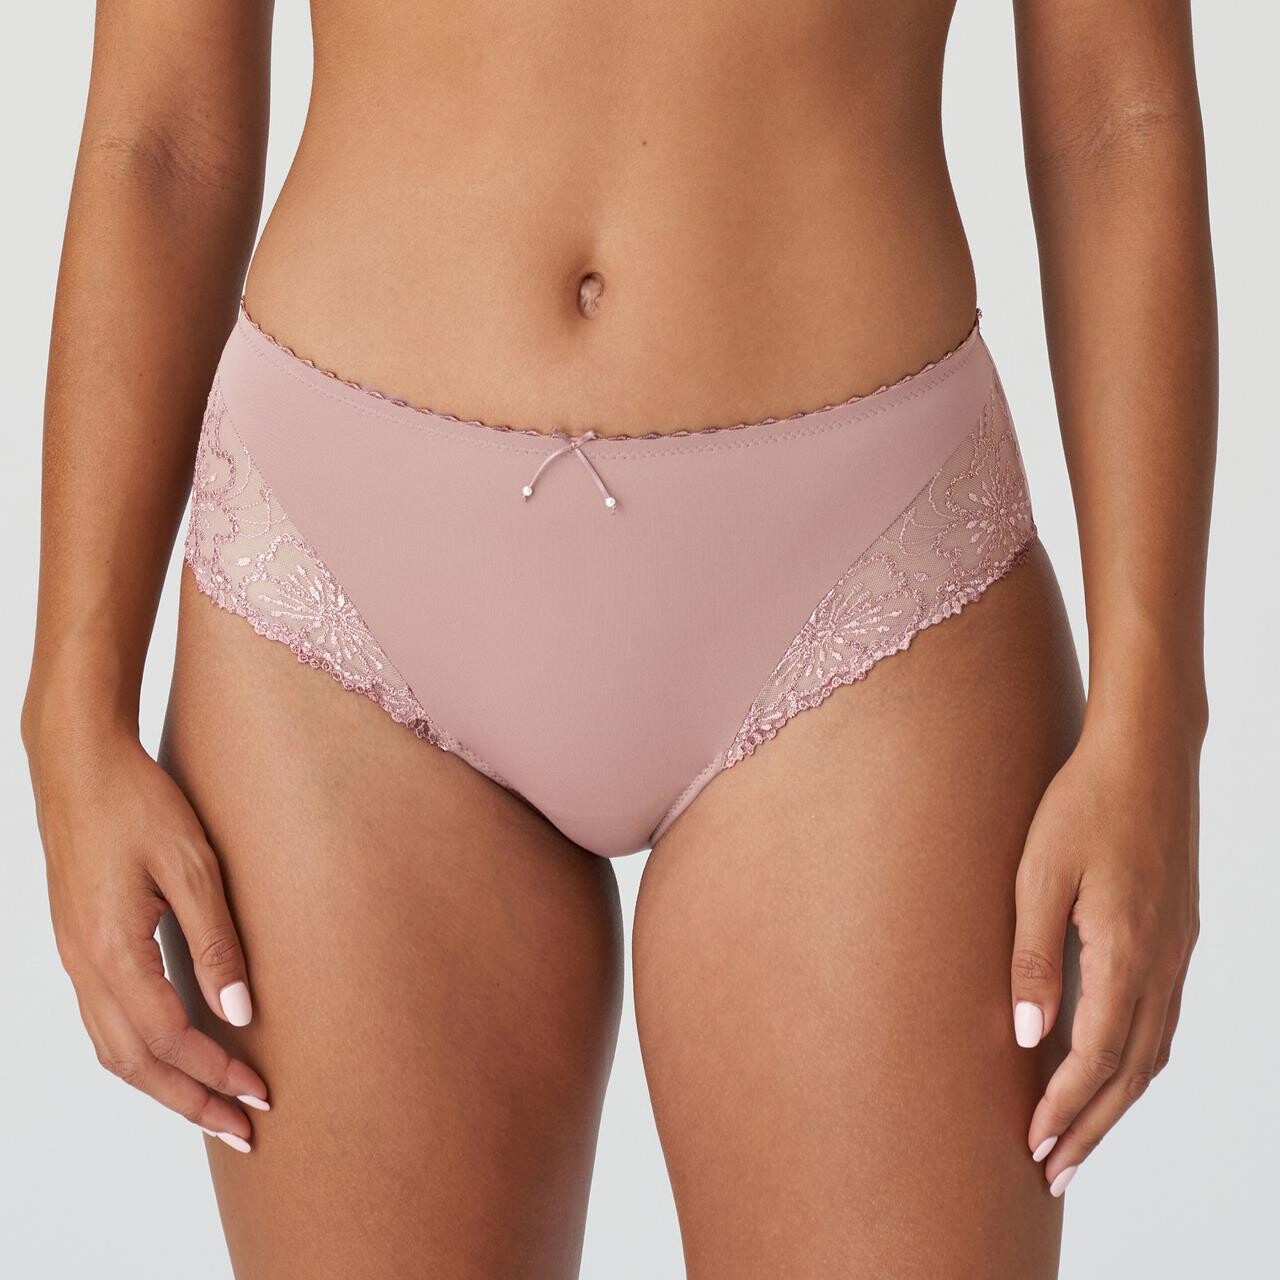 Spanx Undie-Tectable Lace Thong SP0615